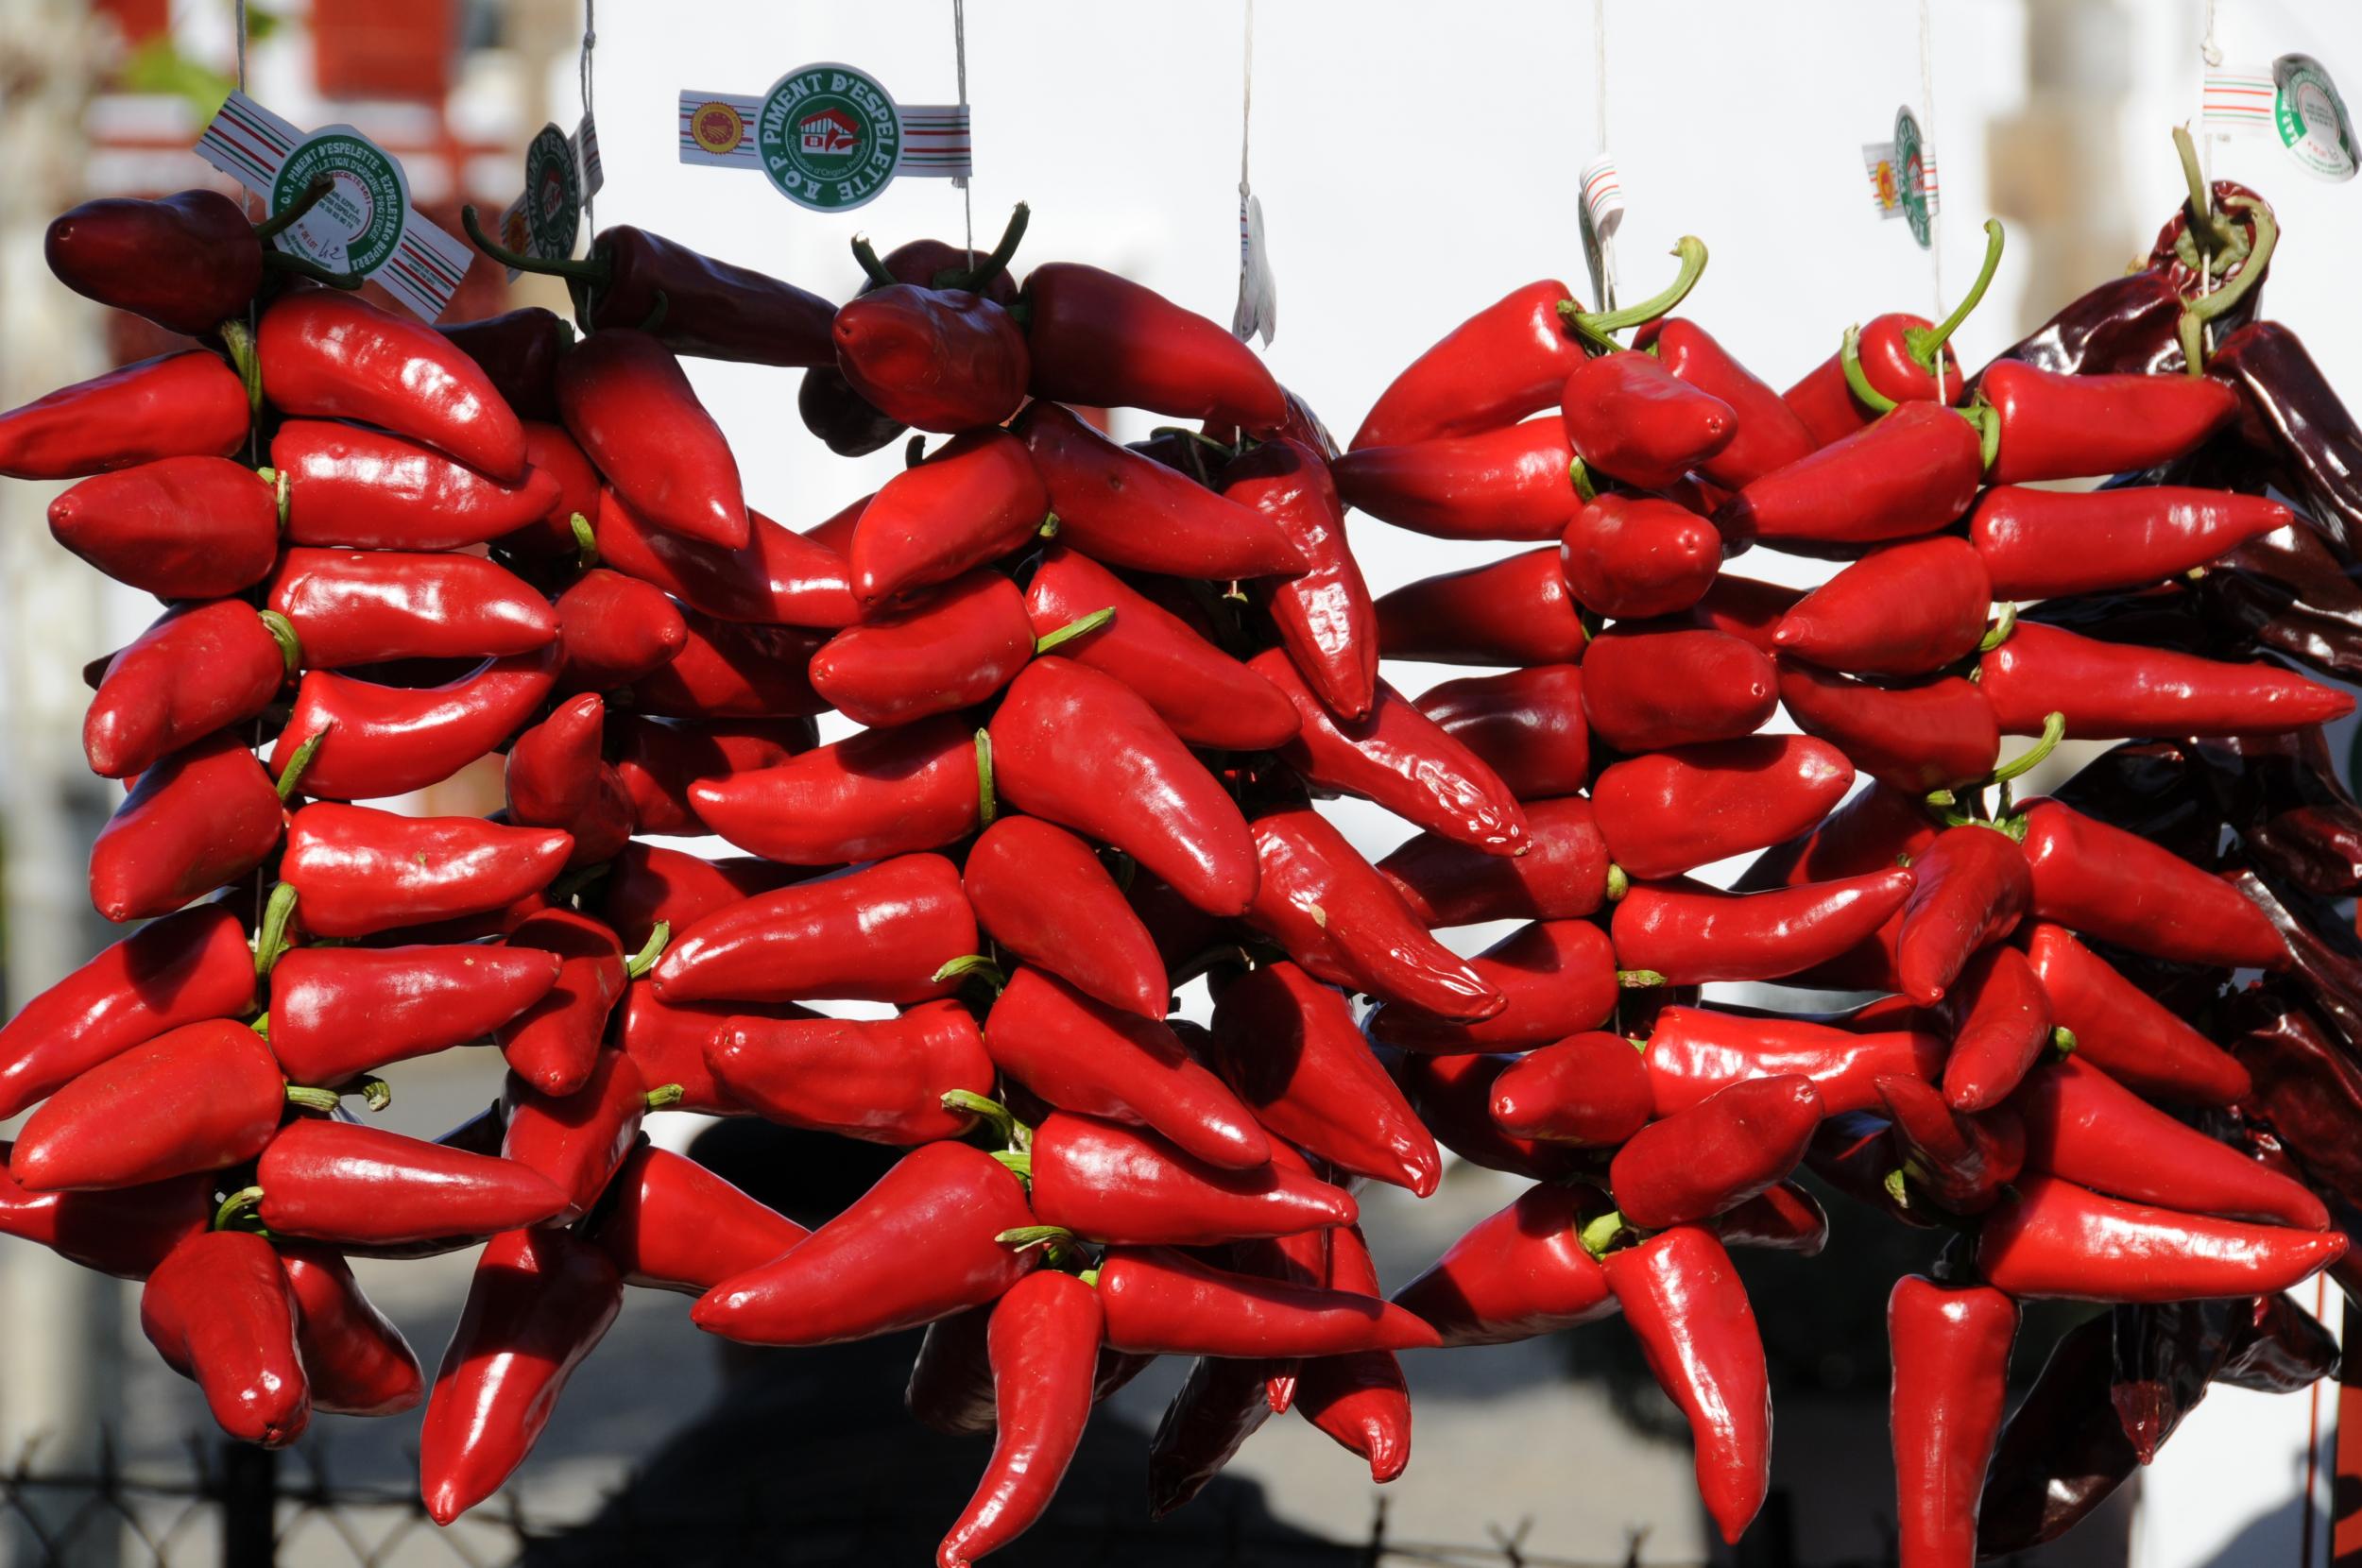 The Espelette Pepper Festival pays homage to the chilli of the same name